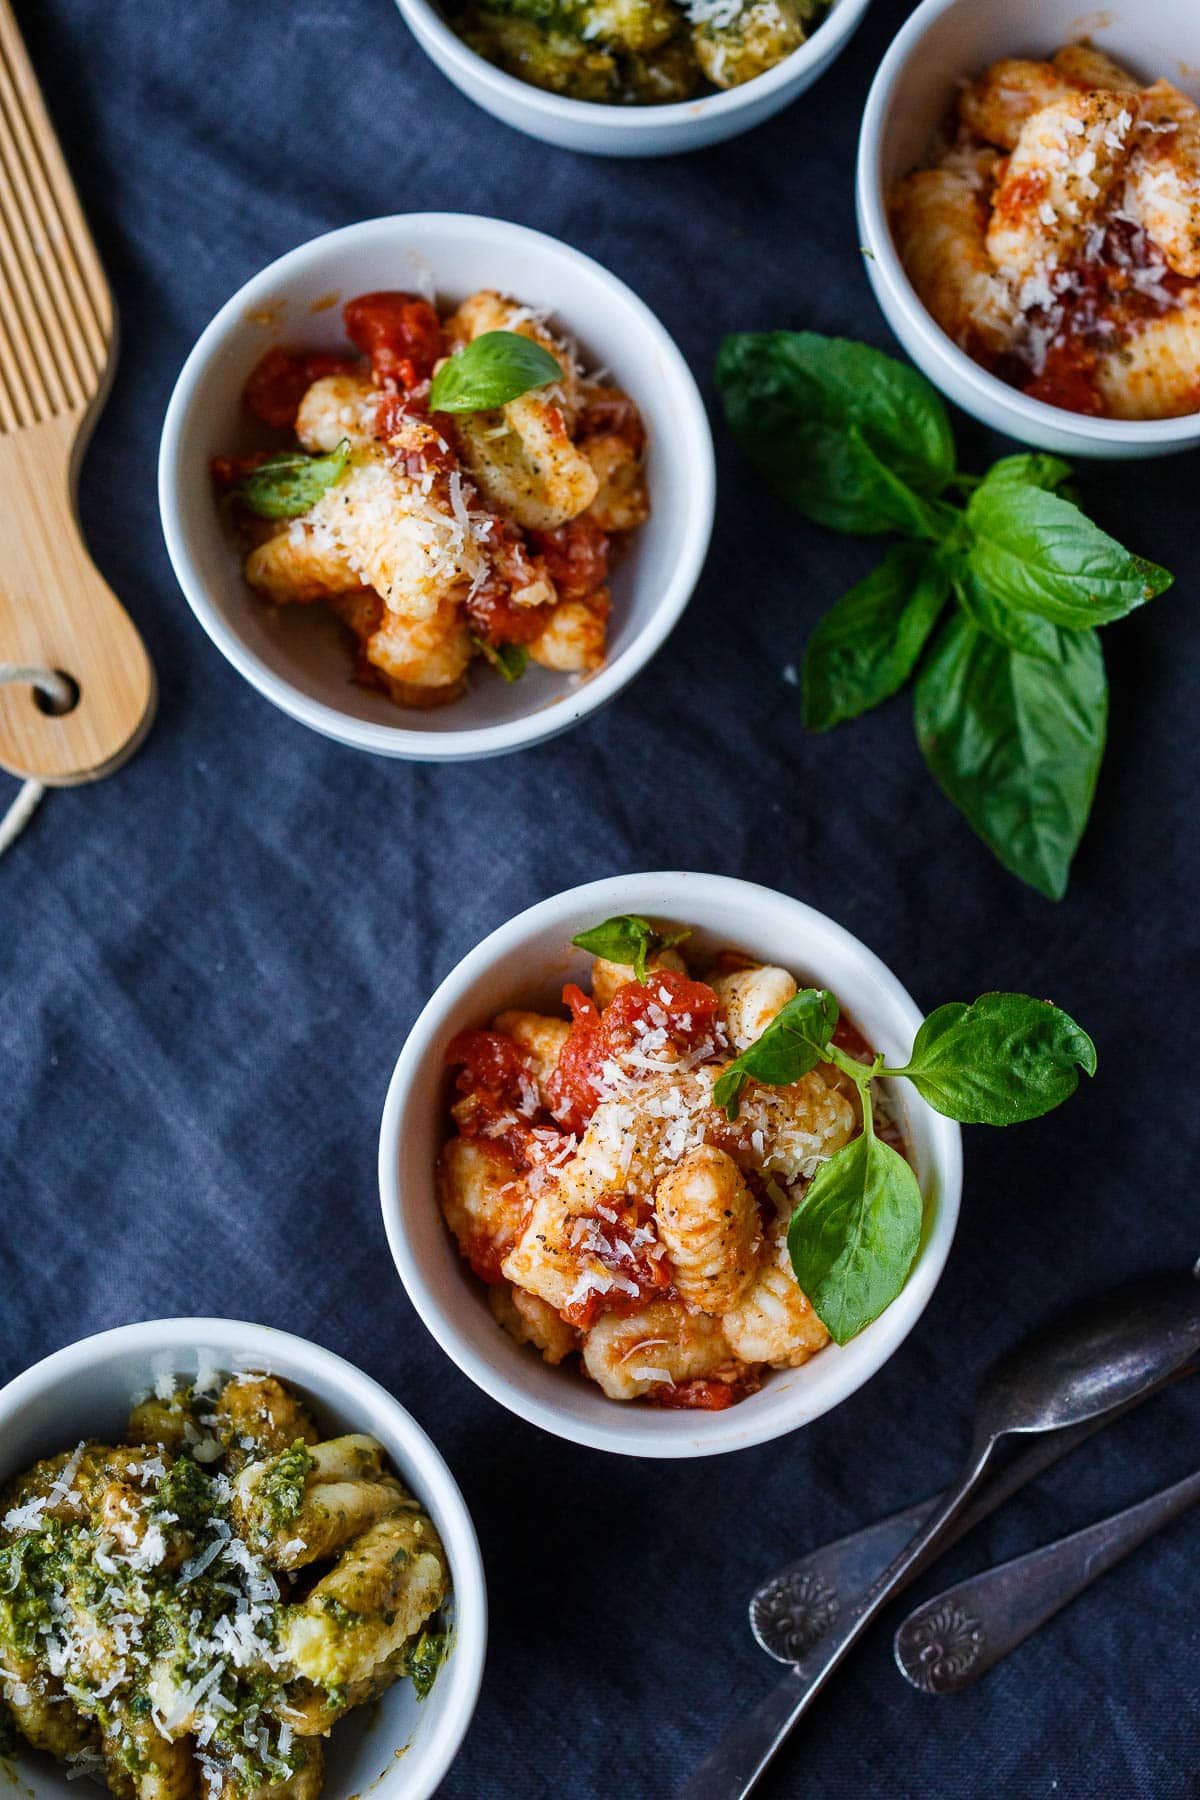 Homemade potato gnocchi! Just four simple ingredients result in the dreamiest little dumplings.  They are actually easier to make then you may think and so much more delicious than store-bought. From baked and sautéed to boiled you'll find so many ways to use them! 